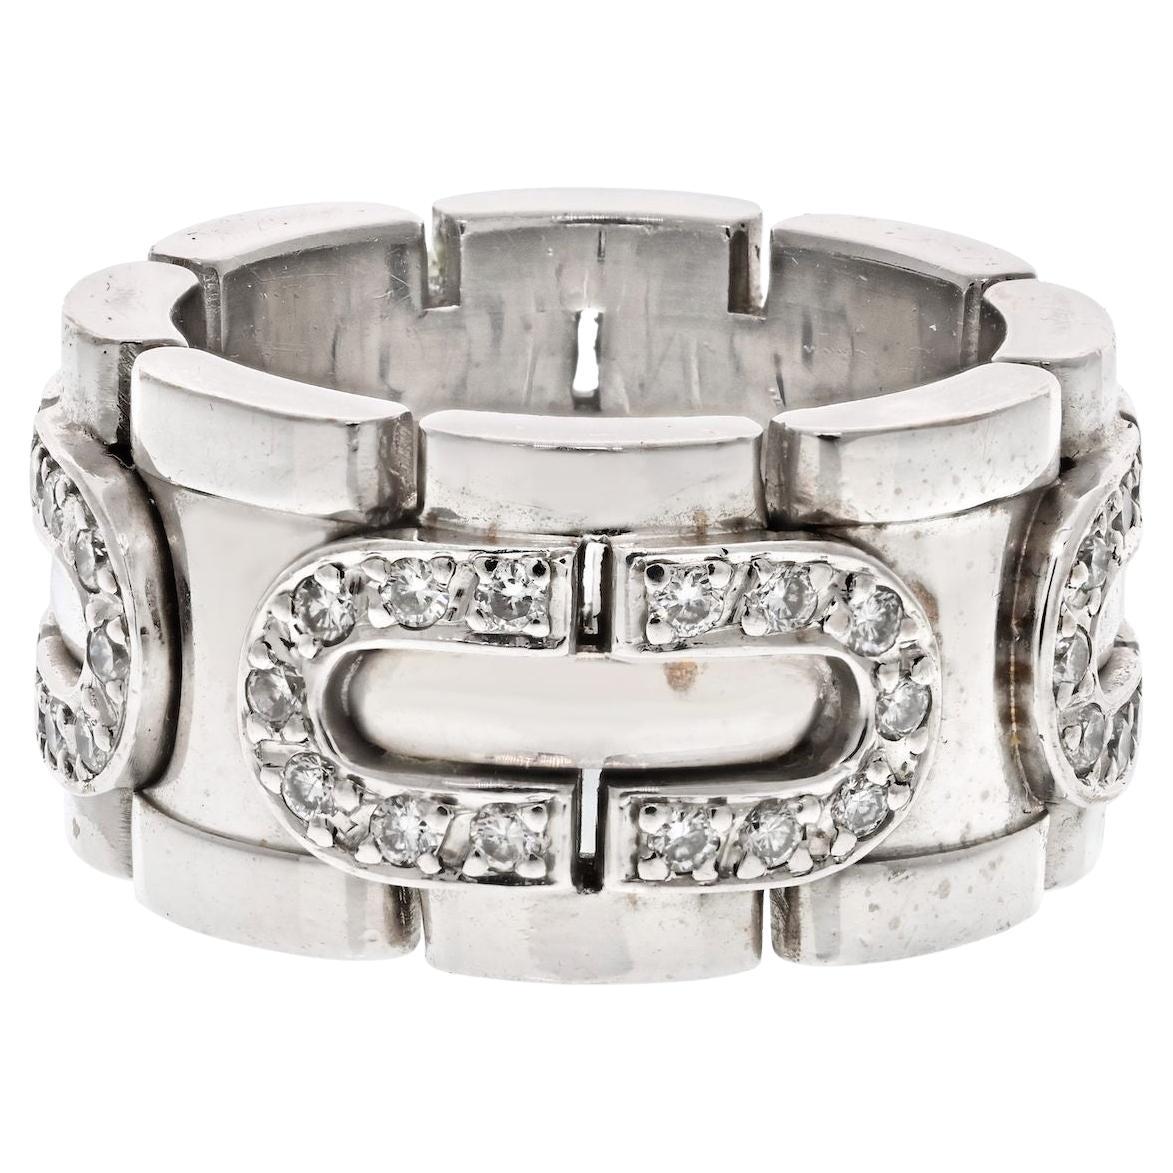 Cartier 18K White Gold Panthere Maillon Diamond Ring For Sale